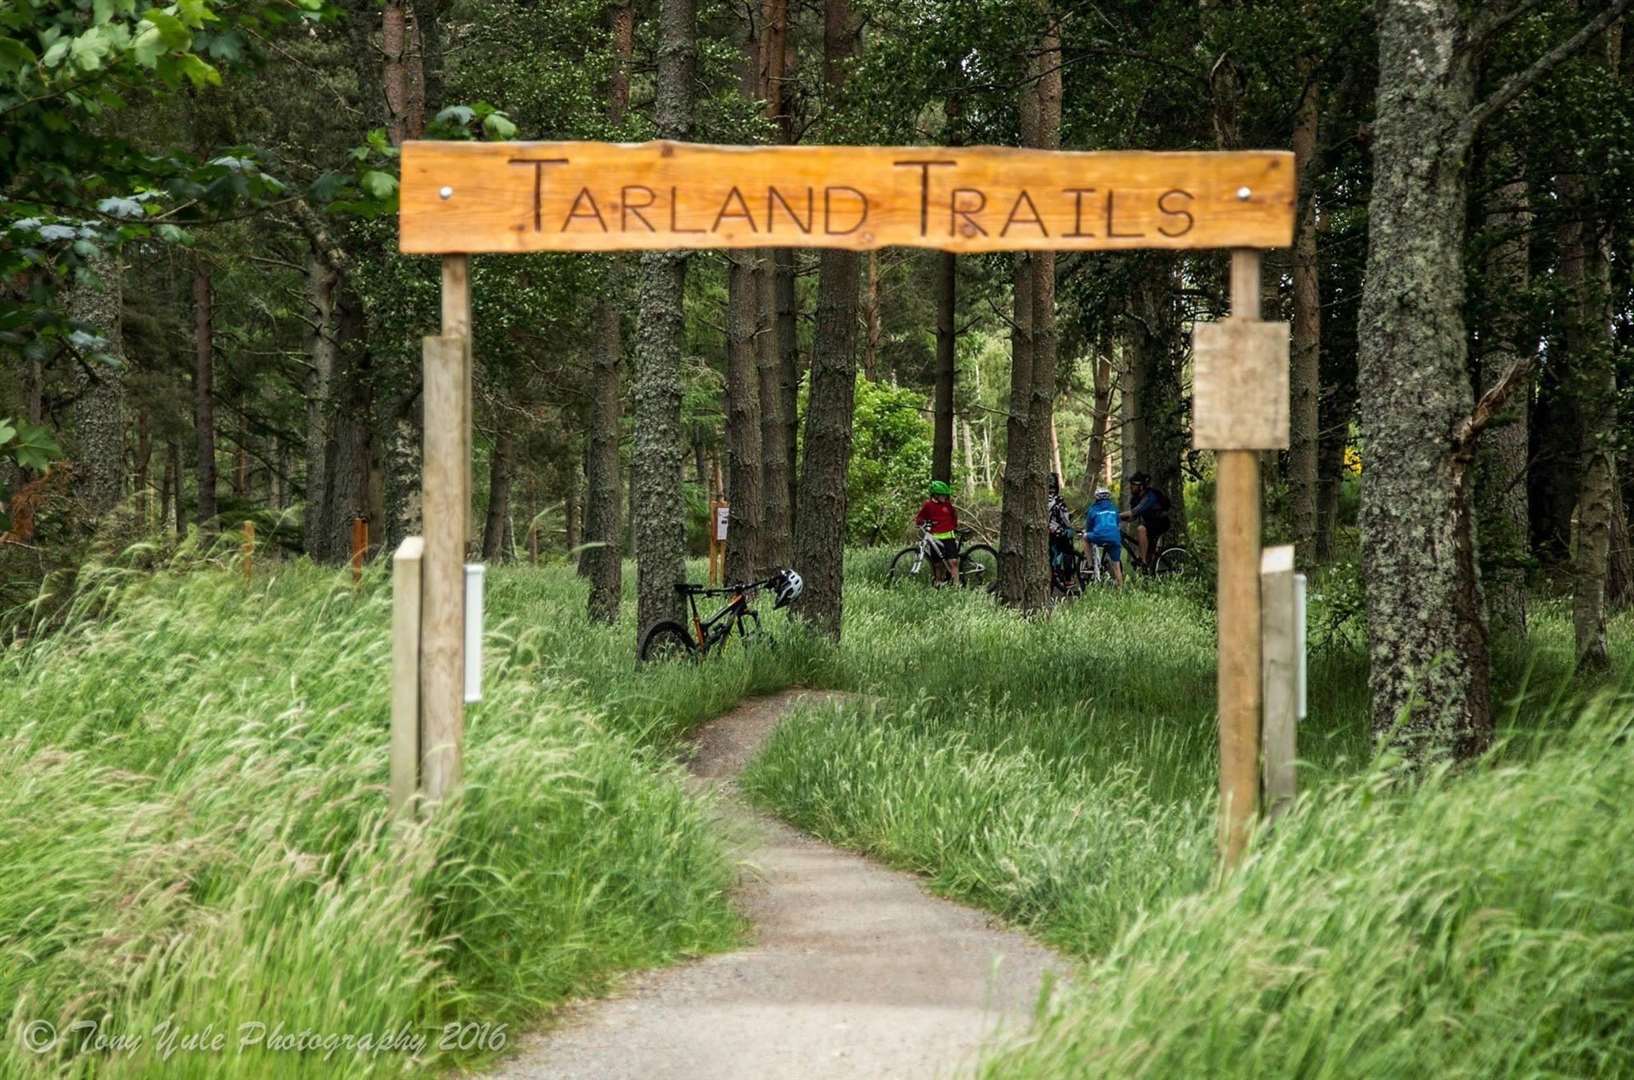 The home of the Tarland Trails